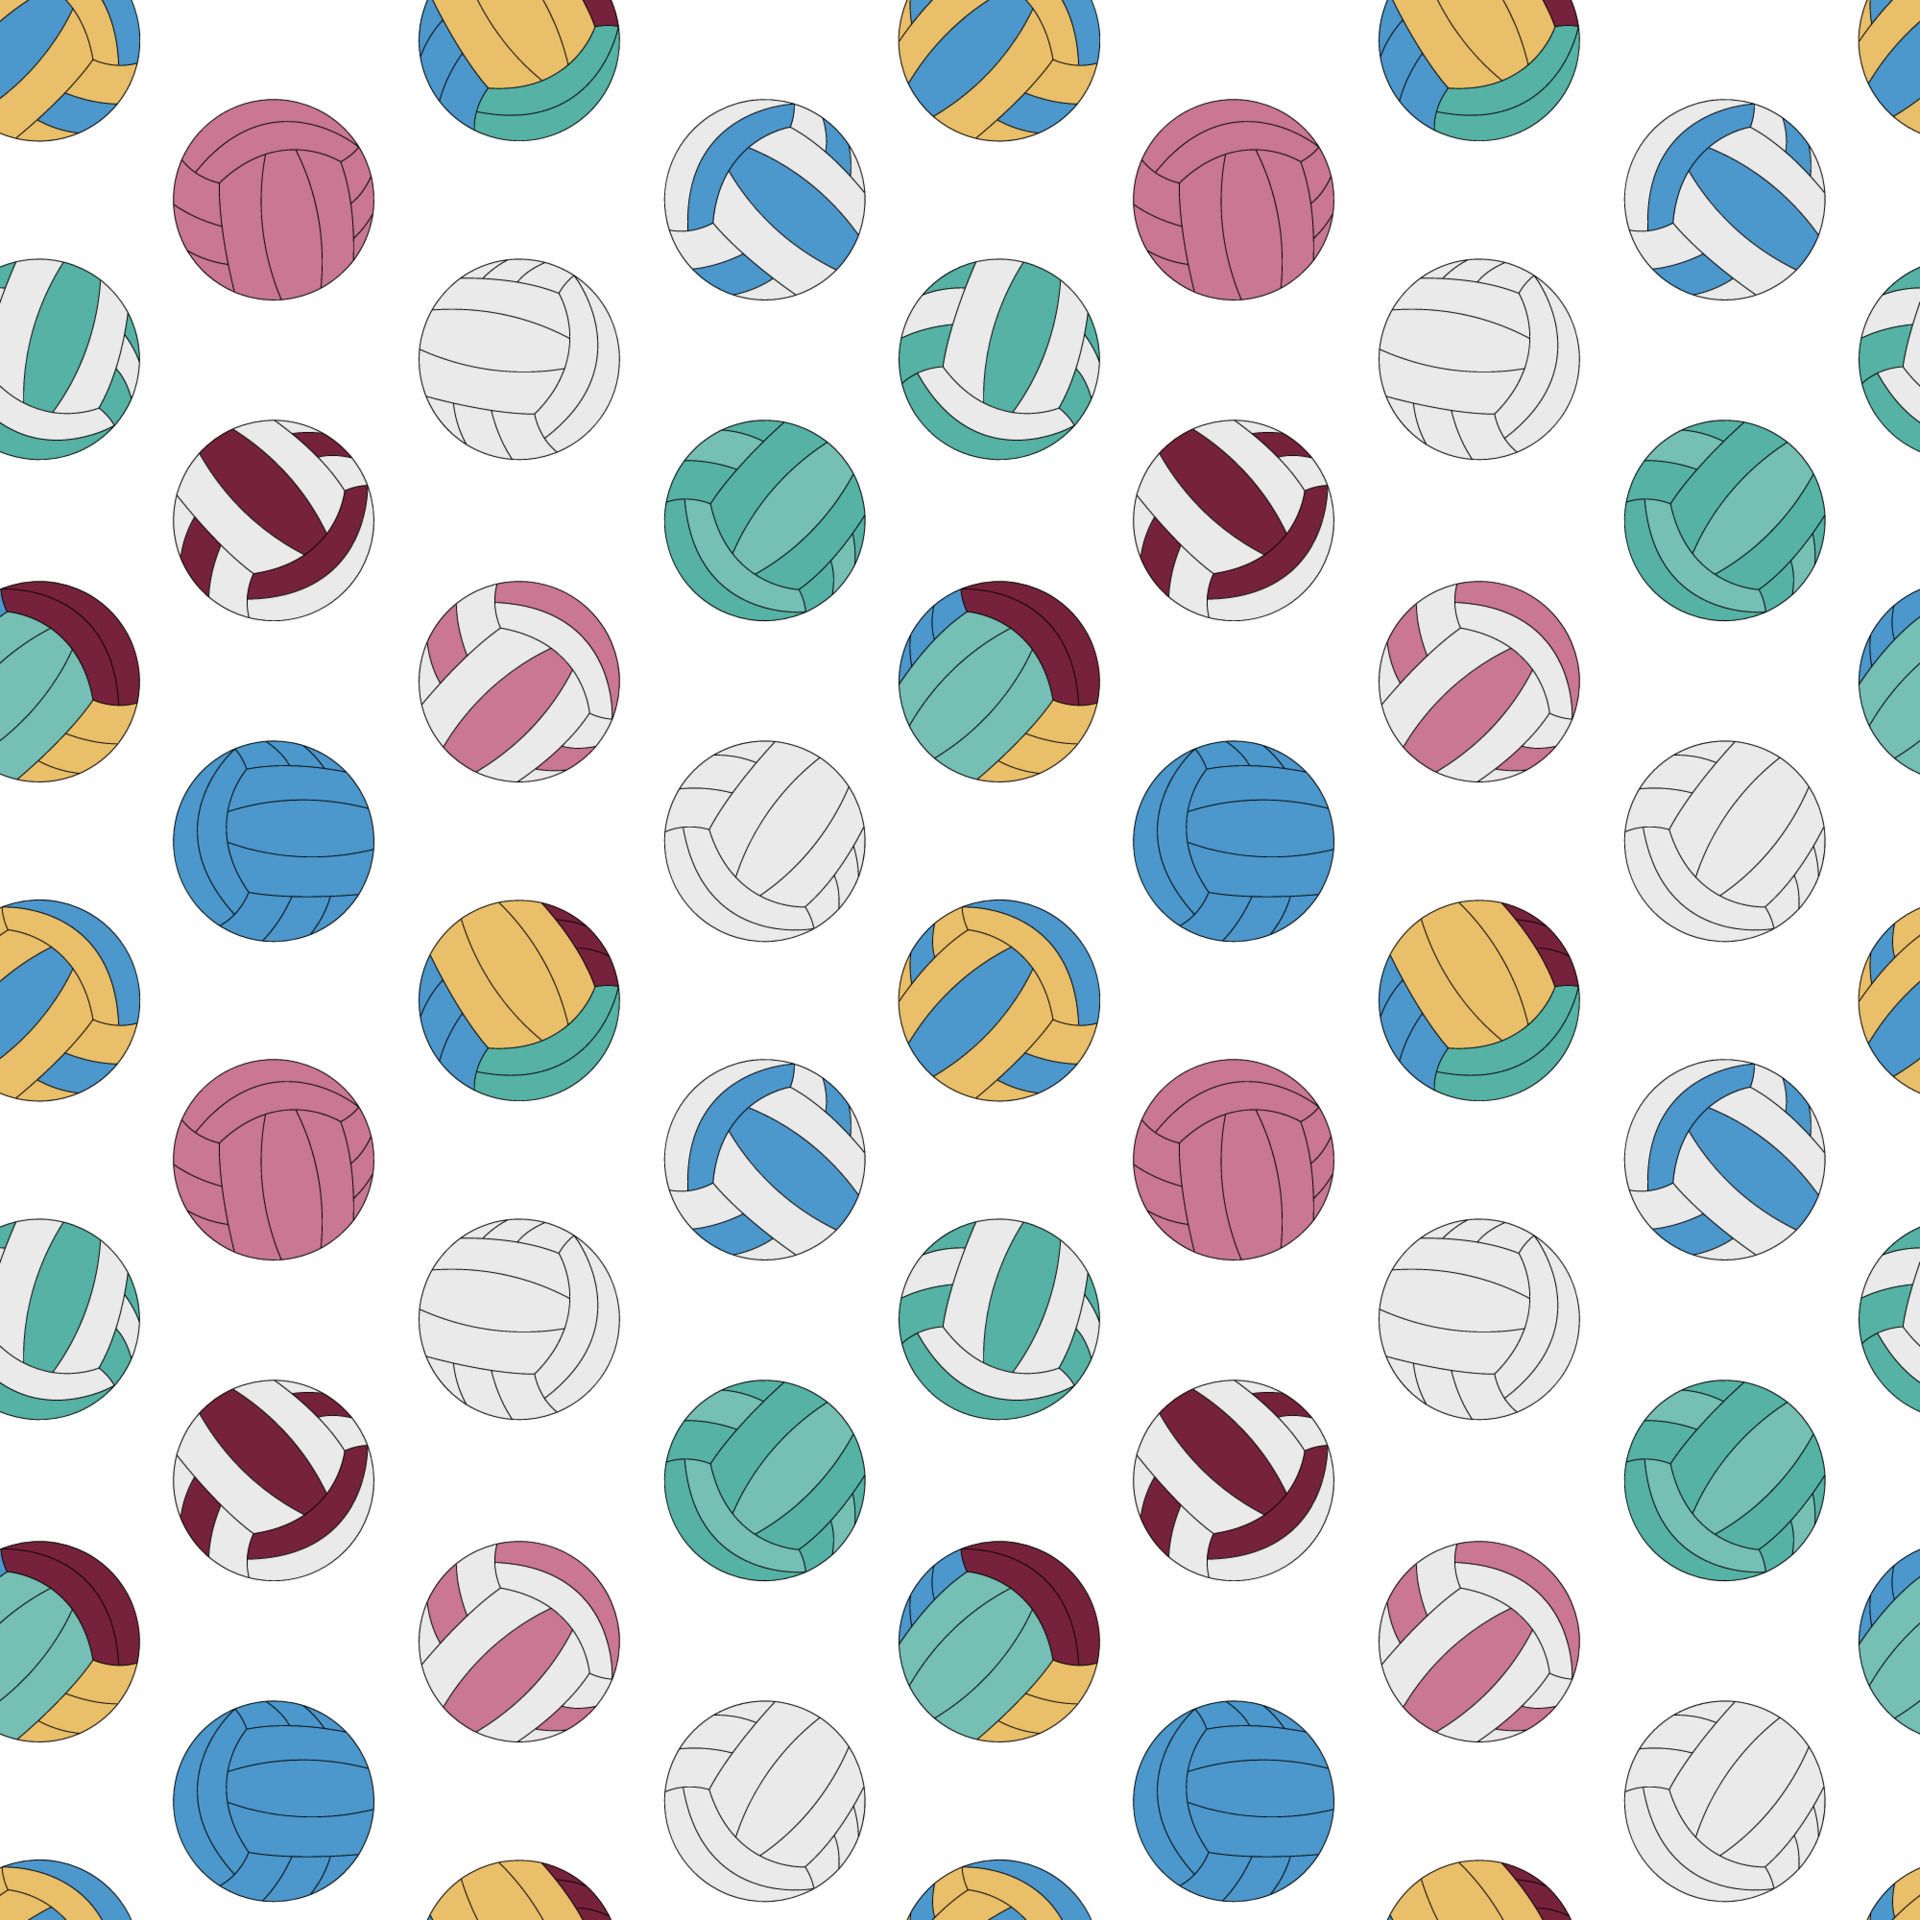 Volleyball pattern. White seamless background with balls for volleyball game. Vector flat sports pattern